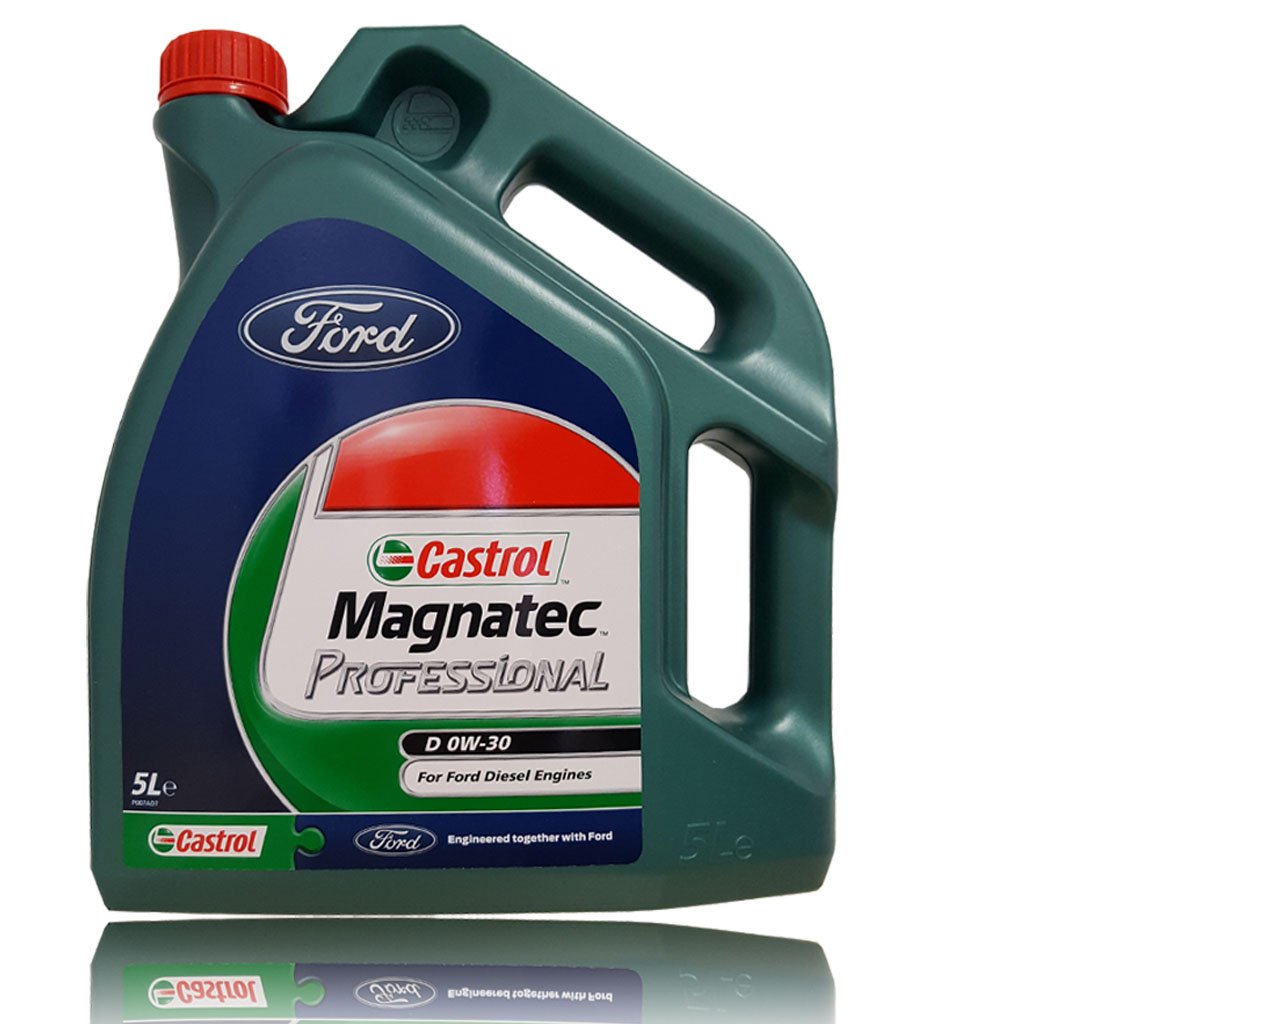 Масло ford ecoboost. Castrol Magnatec 5w30 Ford. Castrol Magnatec 5w30 a5/b5. Castrol Magnatec professional 5w20 Ford. Ford-Castrol Magnatec a5 5w30 1l.